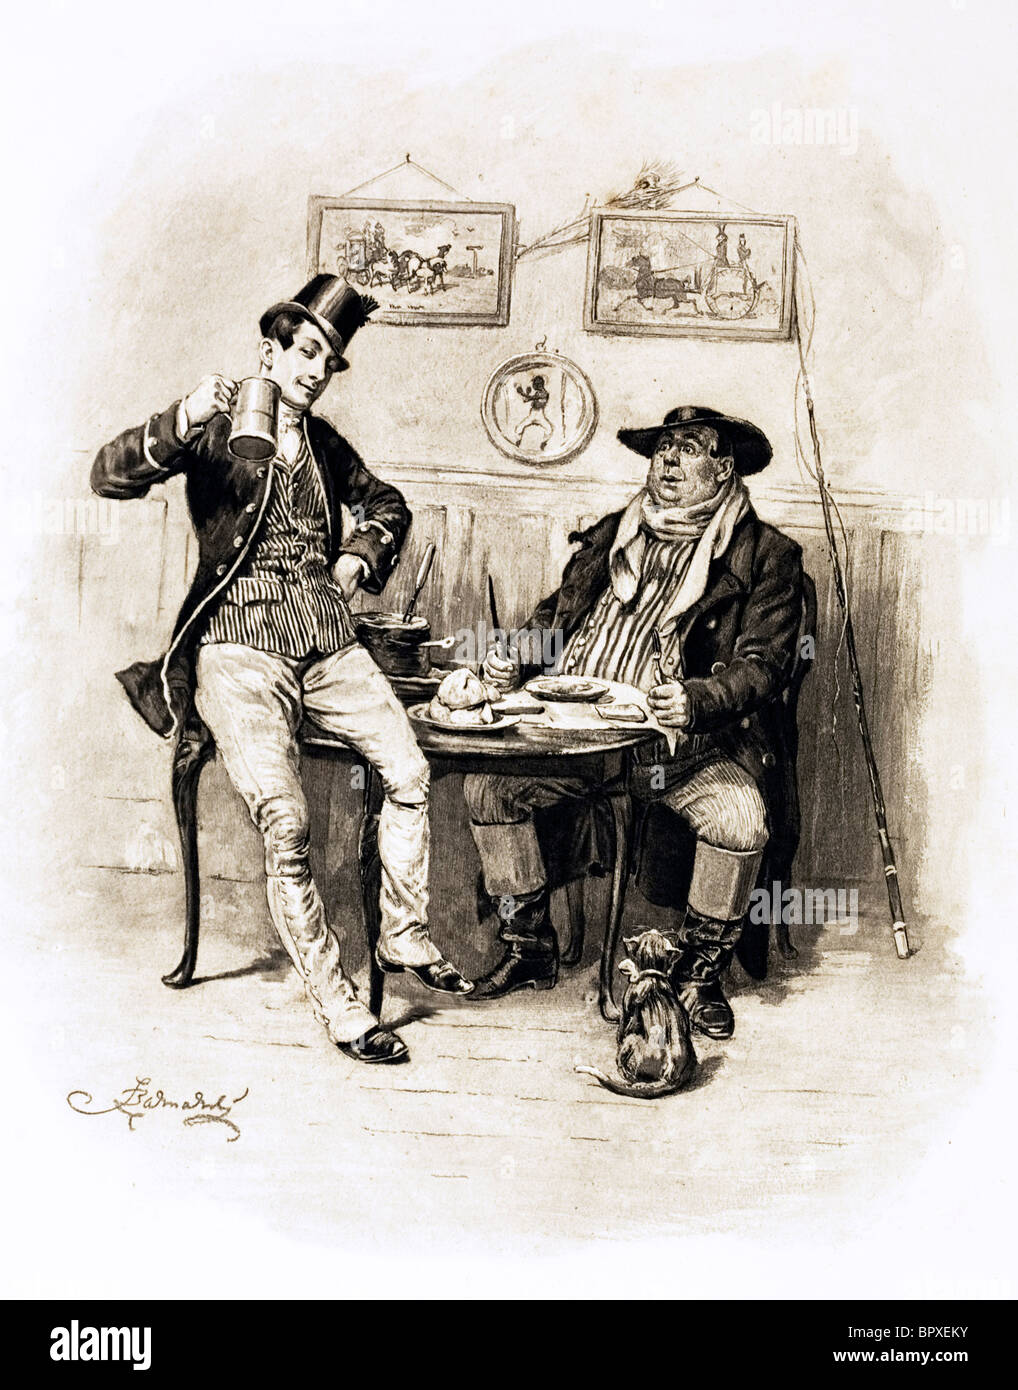 Sketch of Sam Weller and his father in The Marquis of Granby inn, Dorking. From the Pickwick Papers by Charles Dickens. Stock Photo